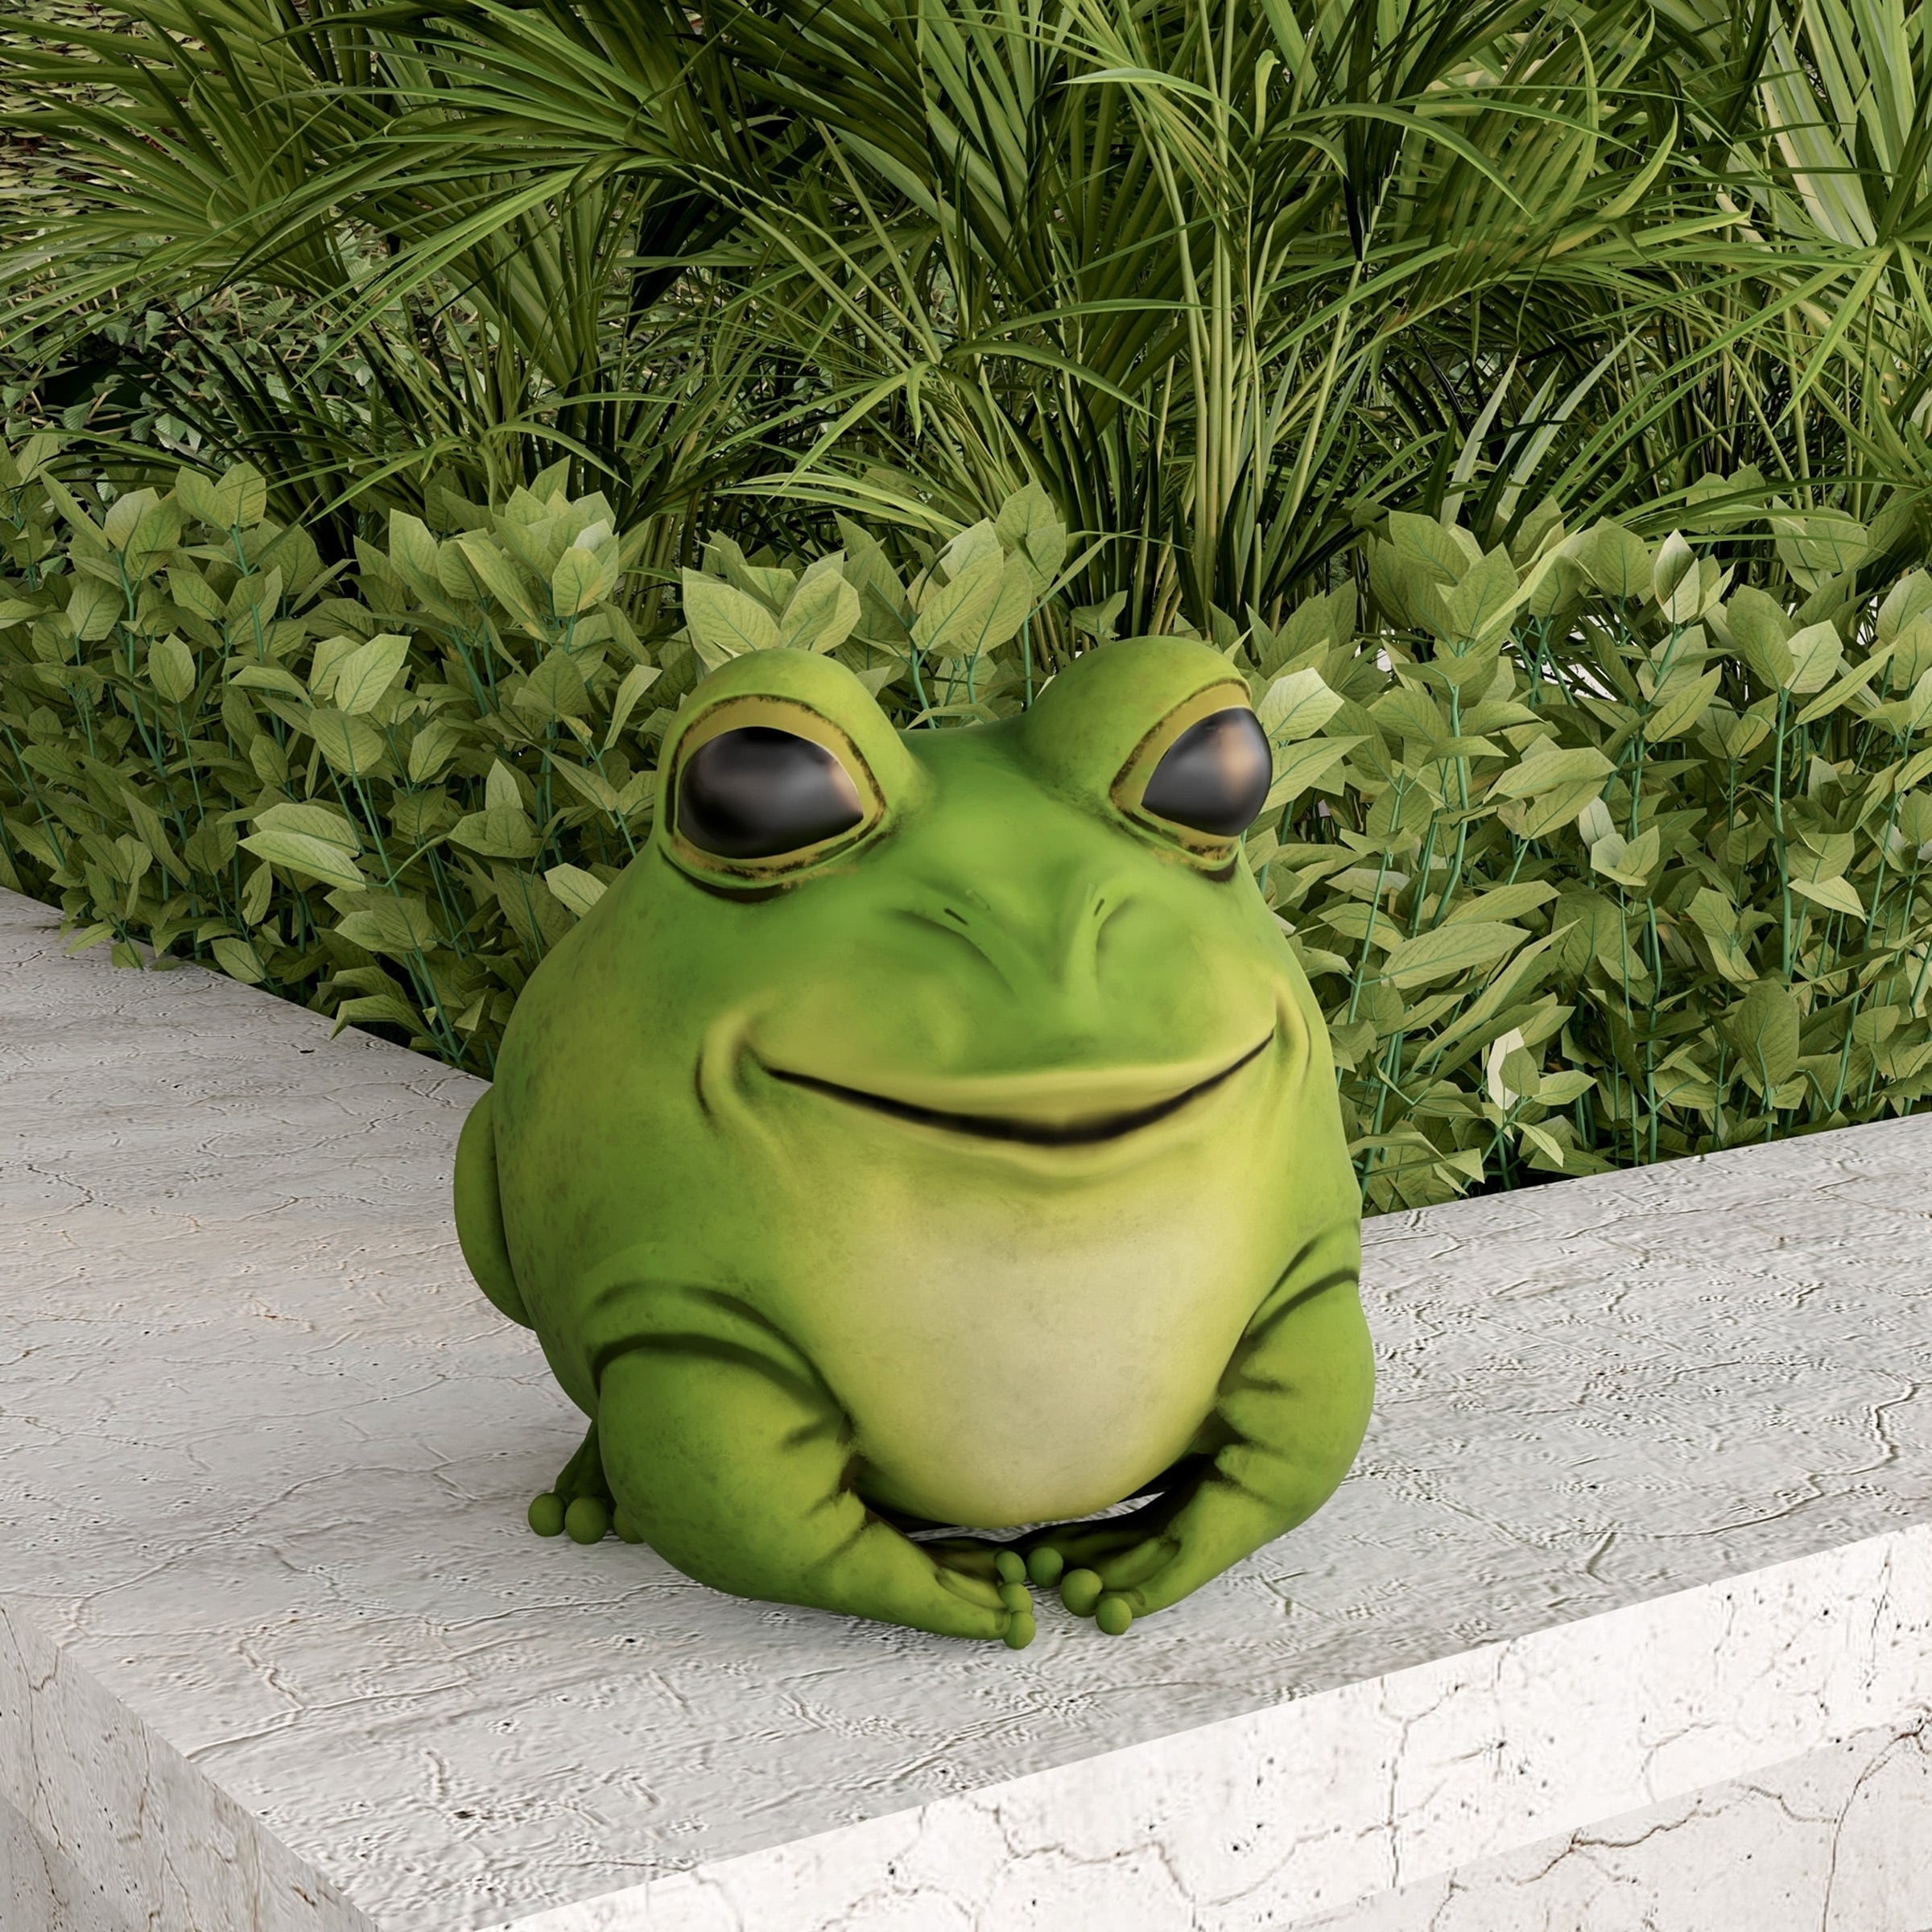 Frog Statue-Resin Chubby Animal Figurine by Pure Garden - On Sale